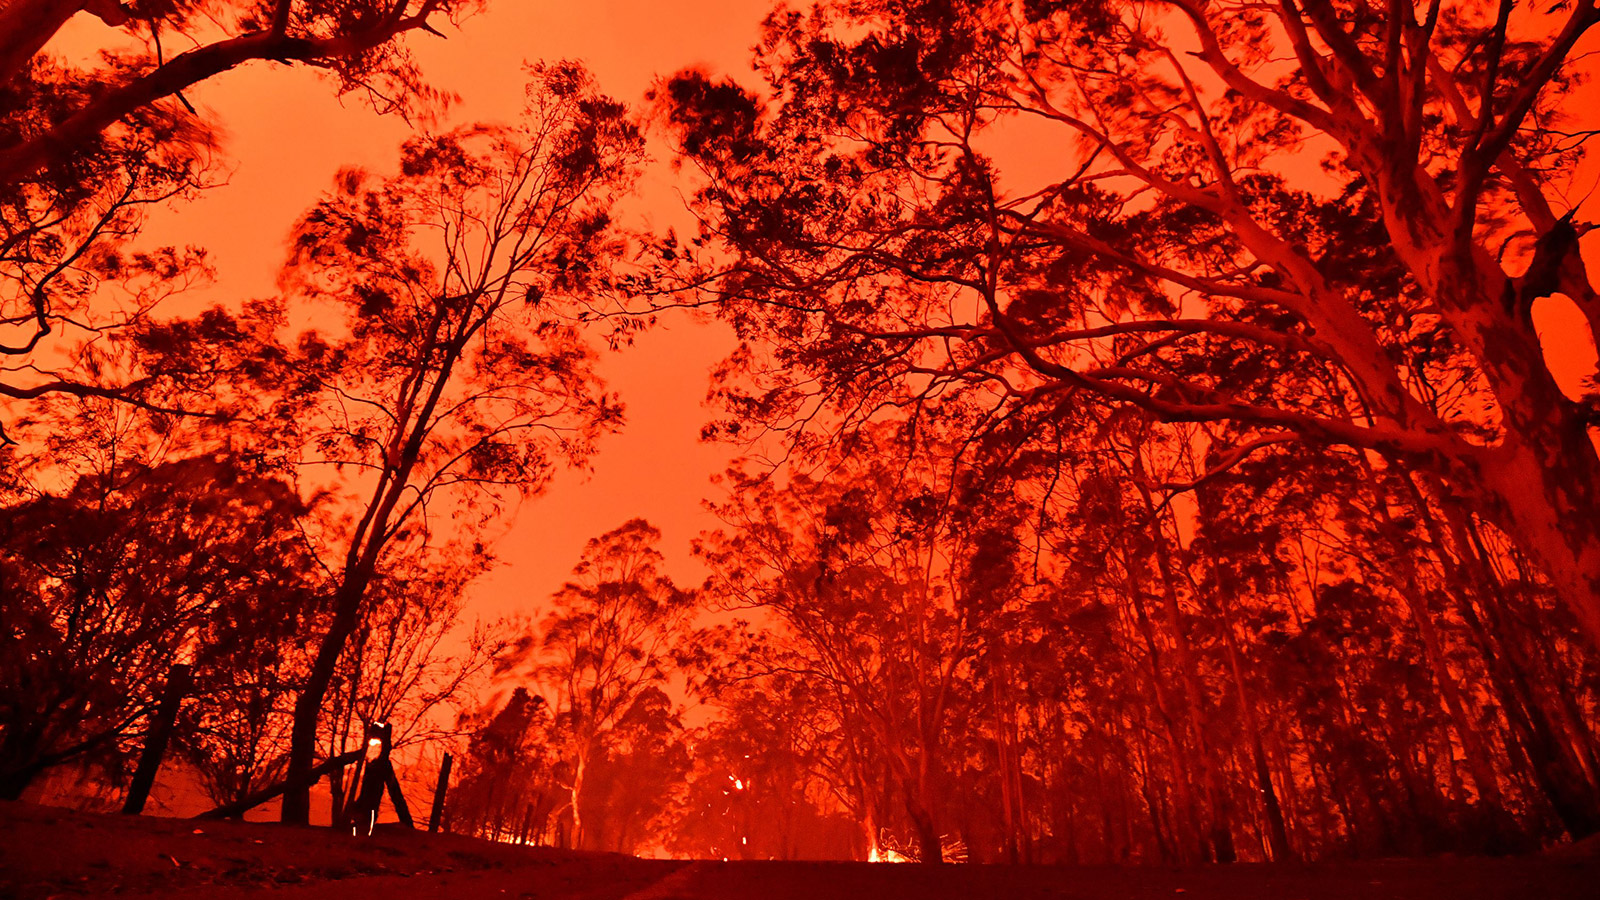 The afternoon sky glows red from bushfires in the area around the town of Nowra in the Australian state of New South Wales on December 31, 2019